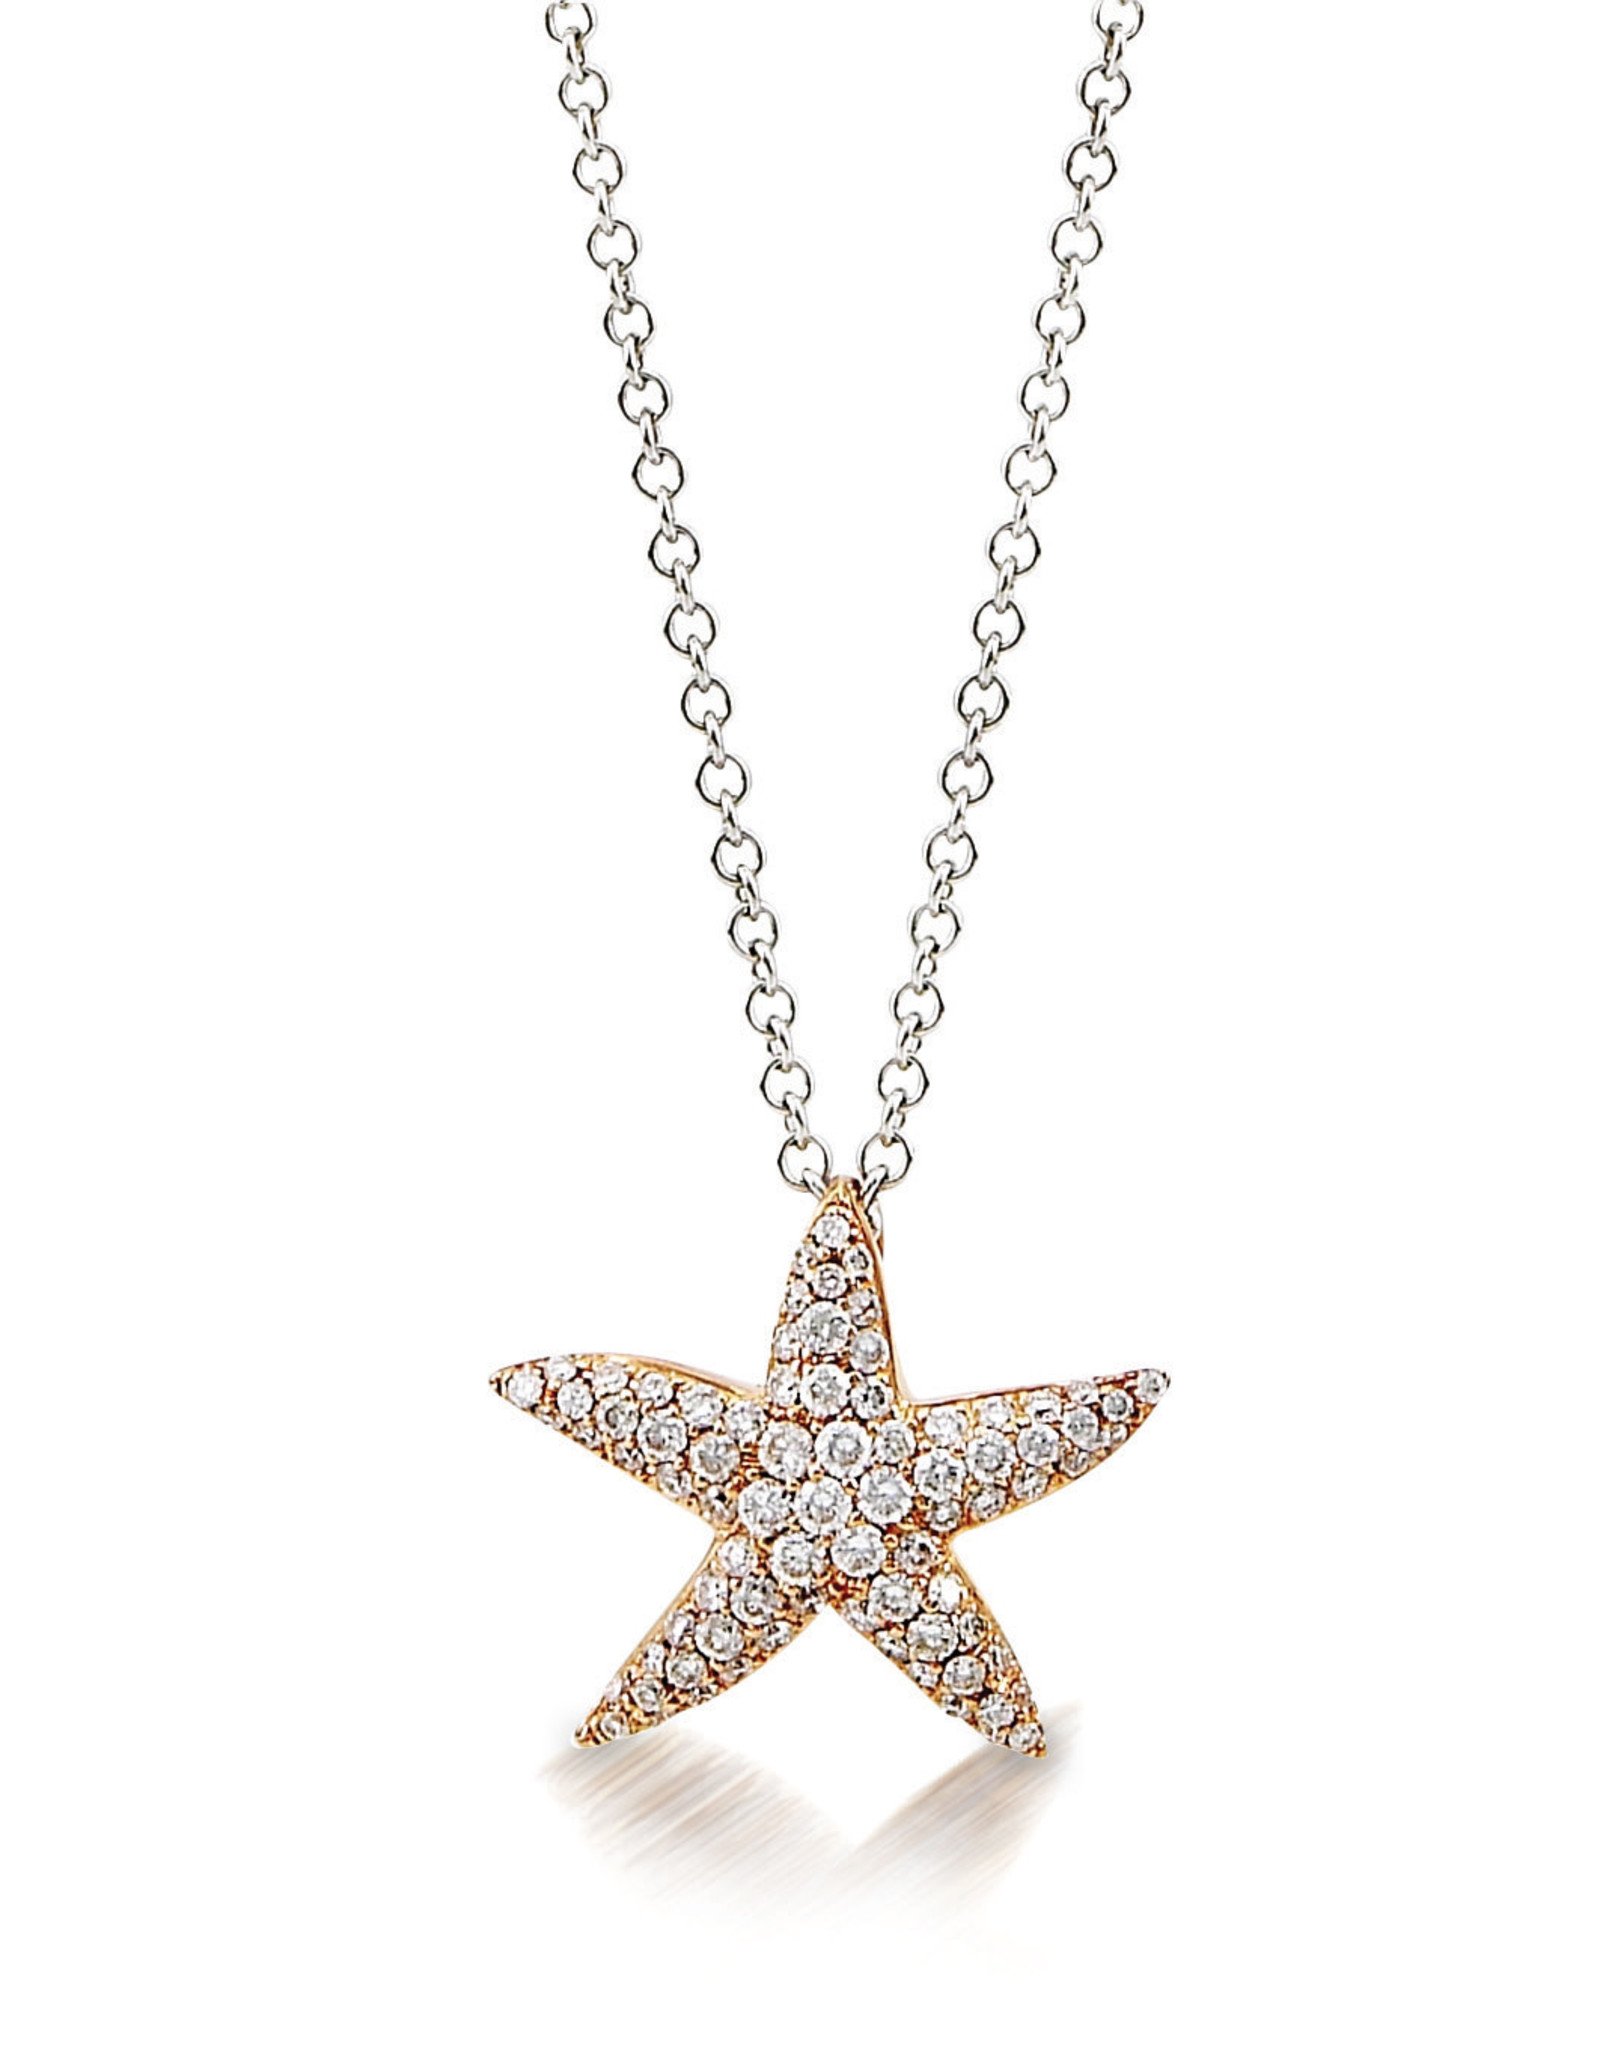 18K Rose Gold Small Starfish Necklace, D: 0.32ct